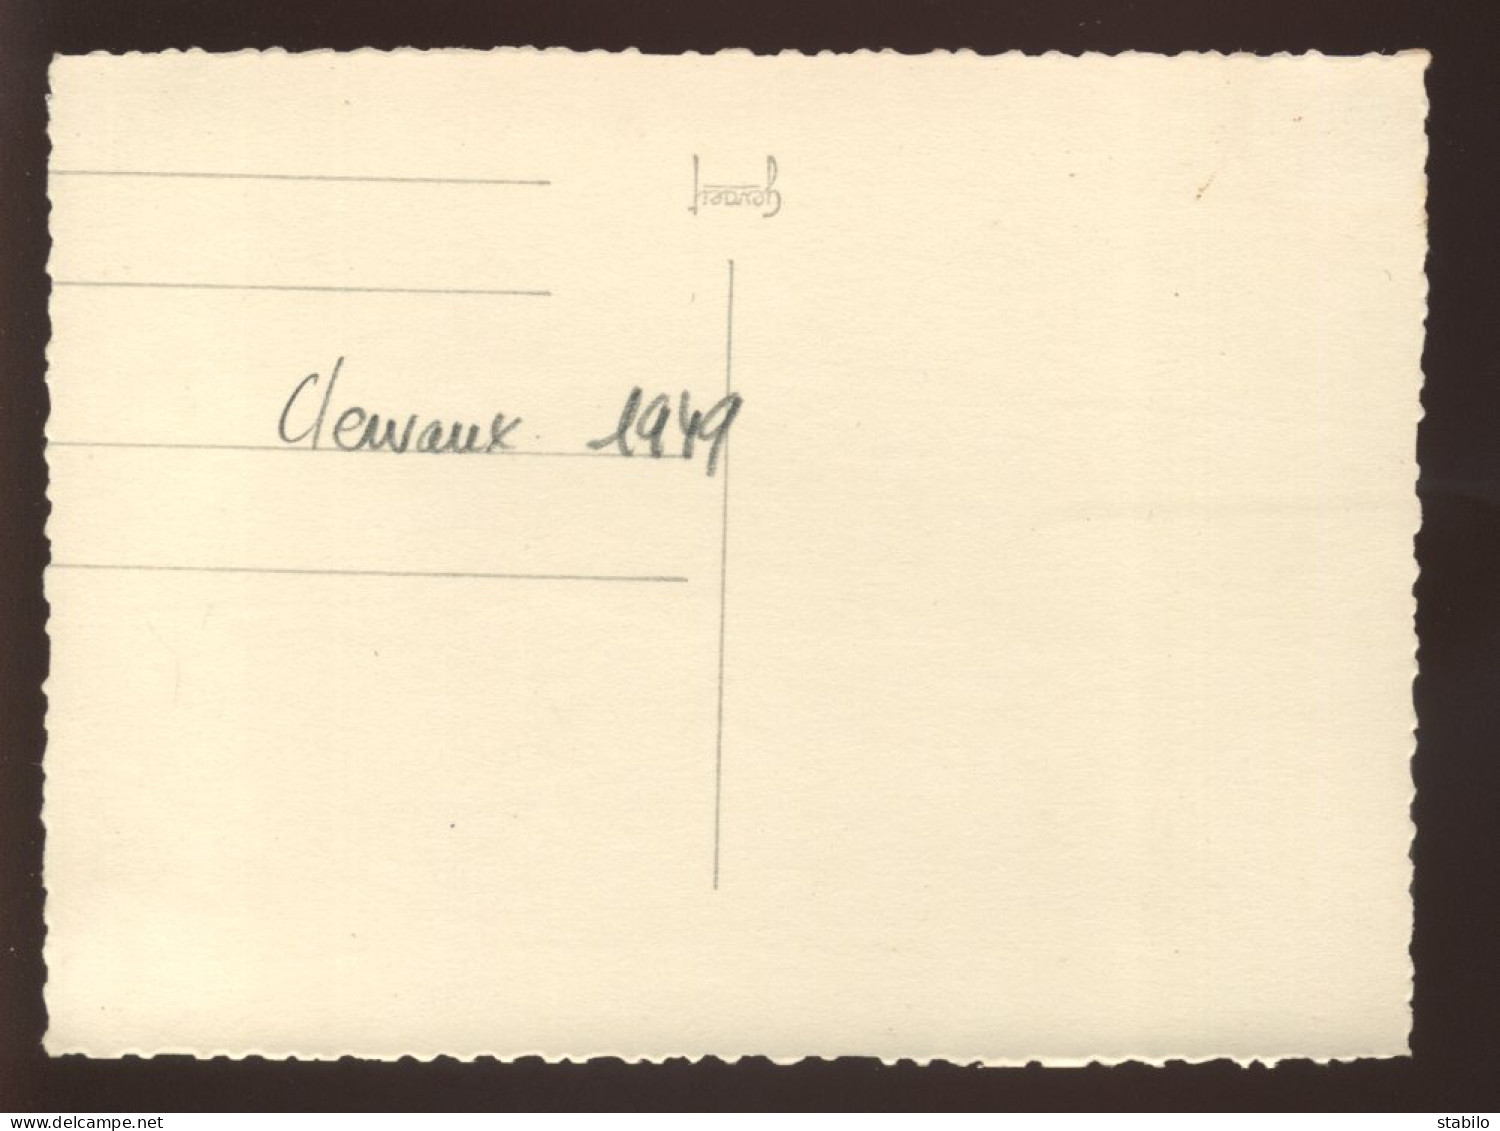 LUXEMBOURG - CLERVAUX - 1949 - FORMAT 11.5 X 8.5 CM  - Lugares